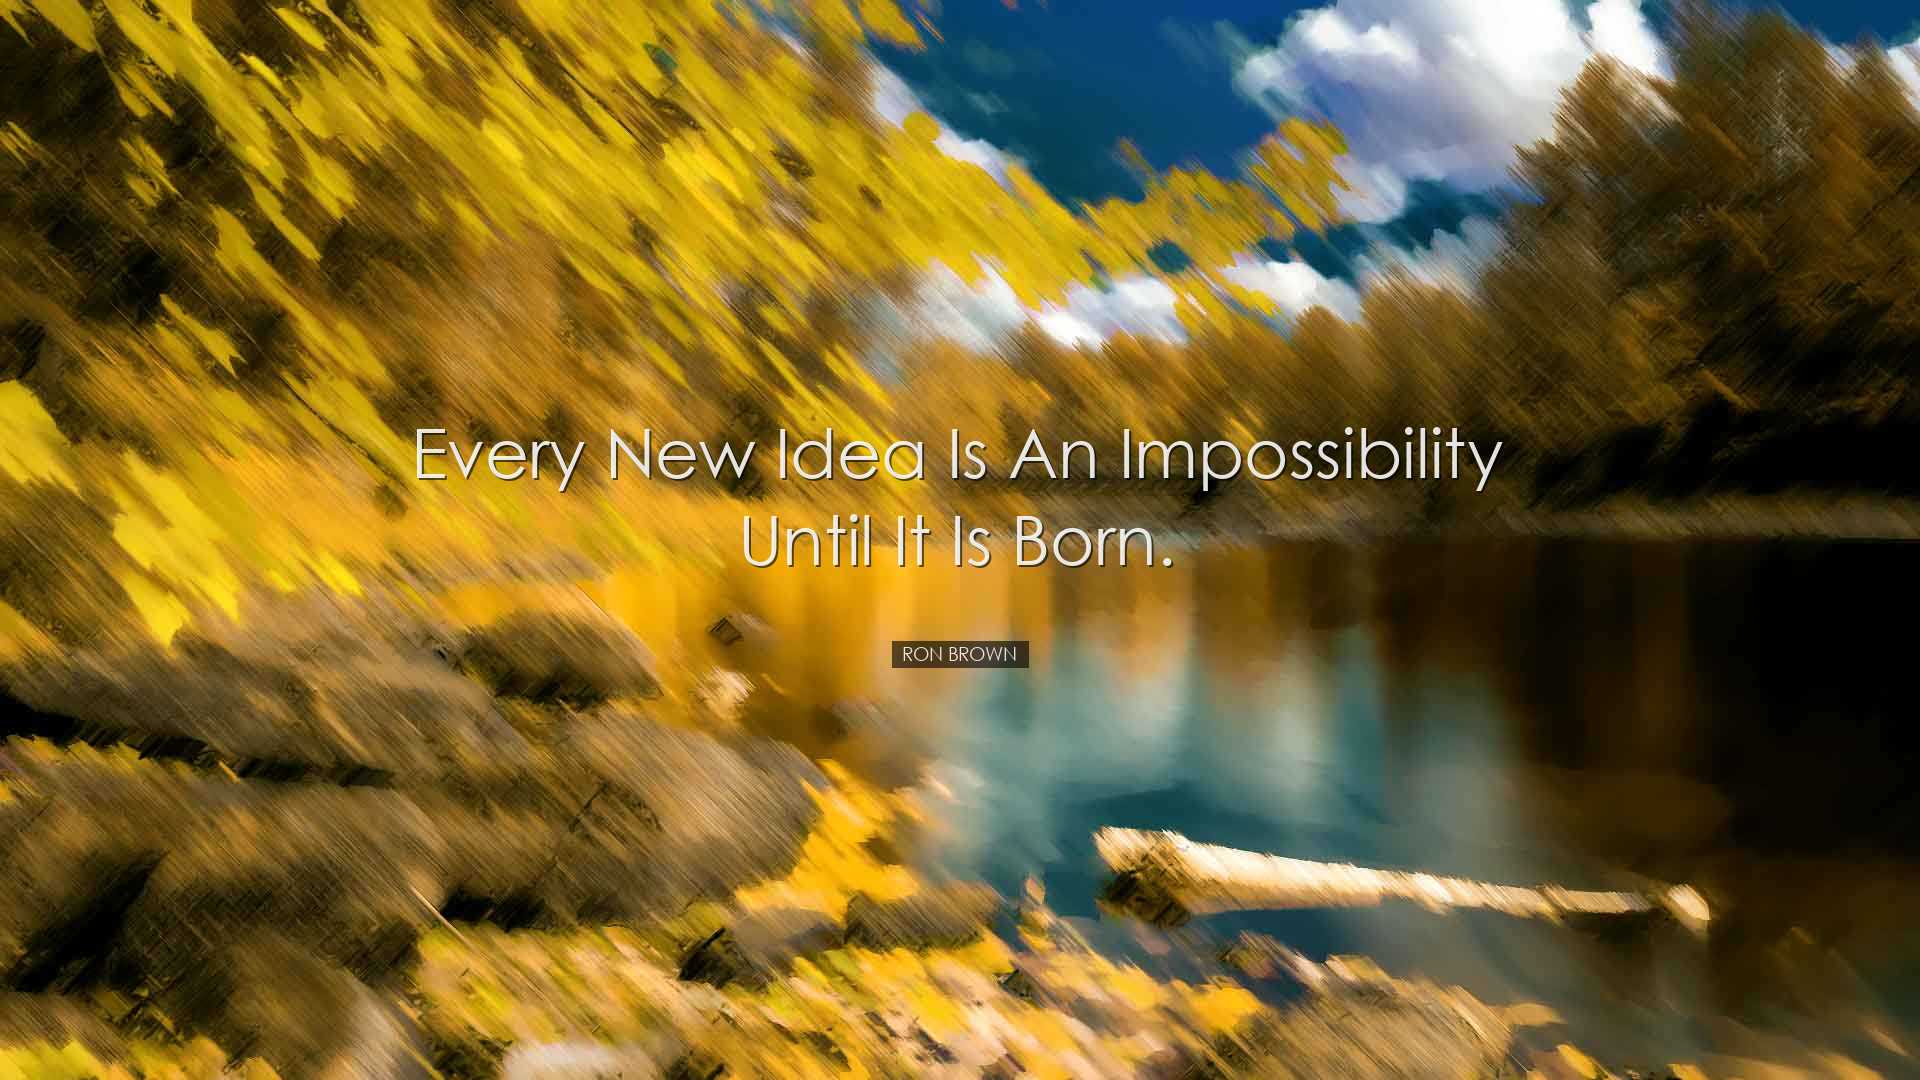 Every new idea is an impossibility until it is born. - Ron Brown